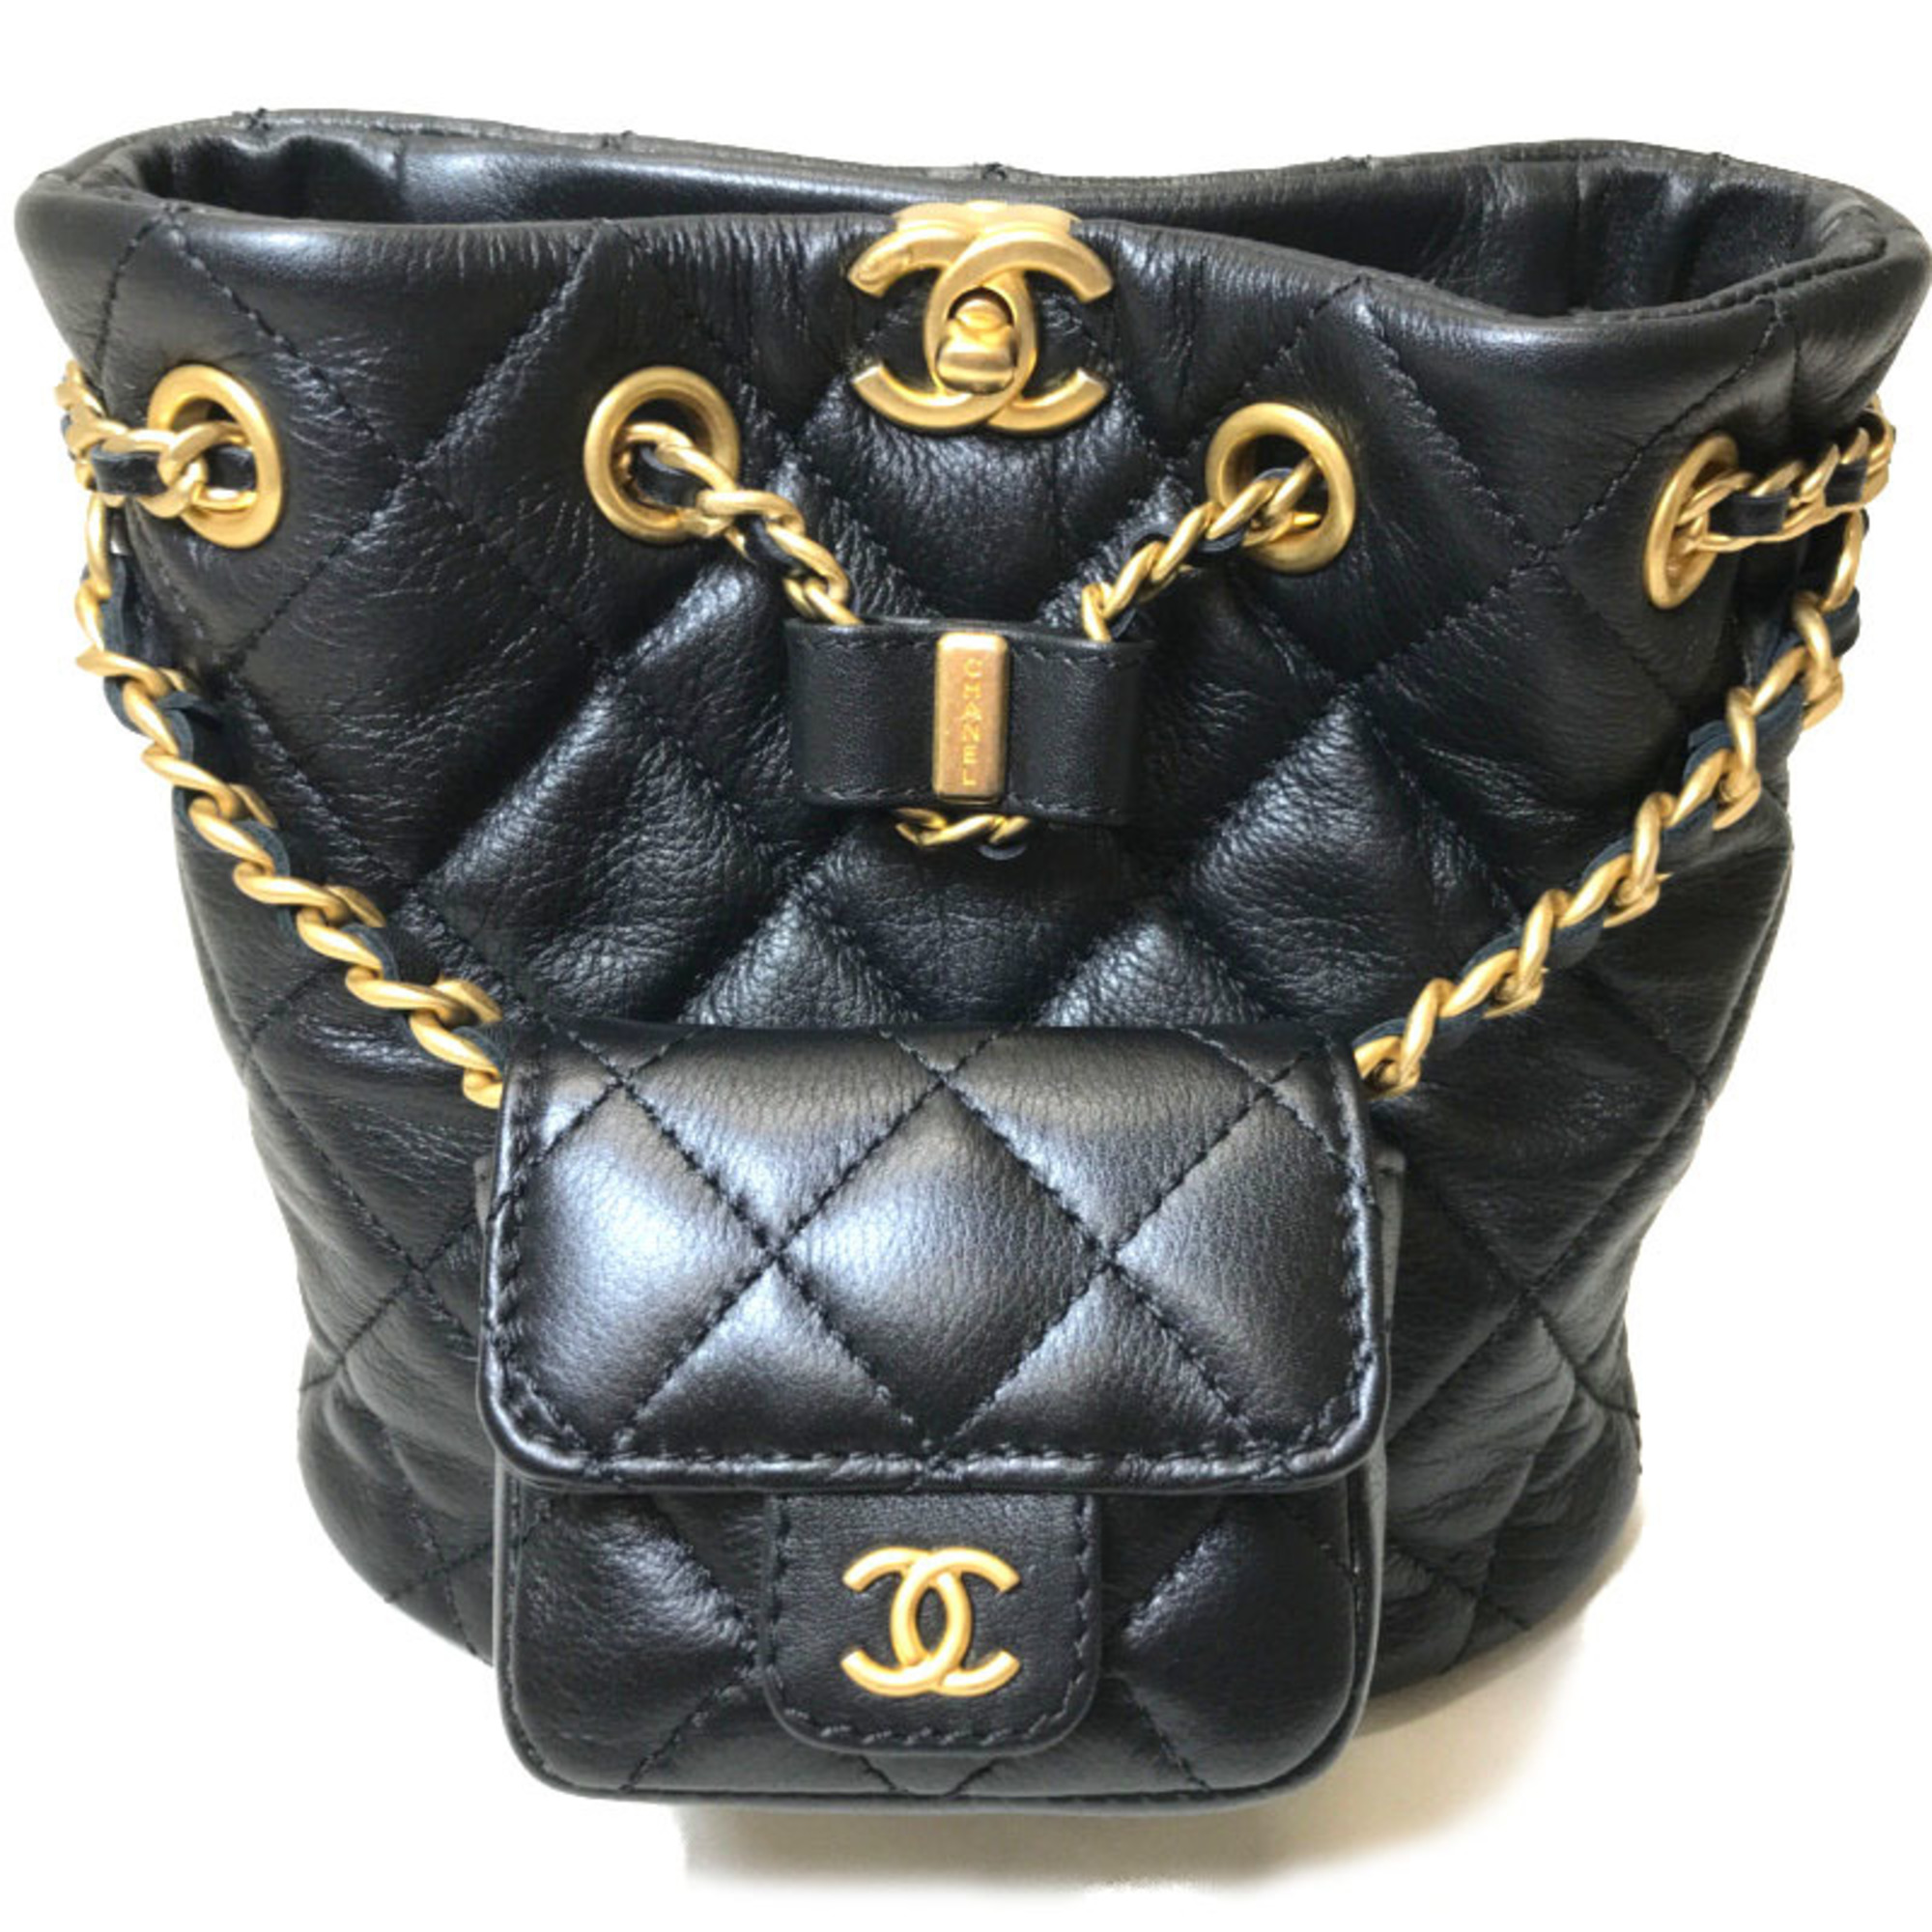 CHANEL Rucksack Backpack Small Matelasse Quilted Leather Black Women's AS3947